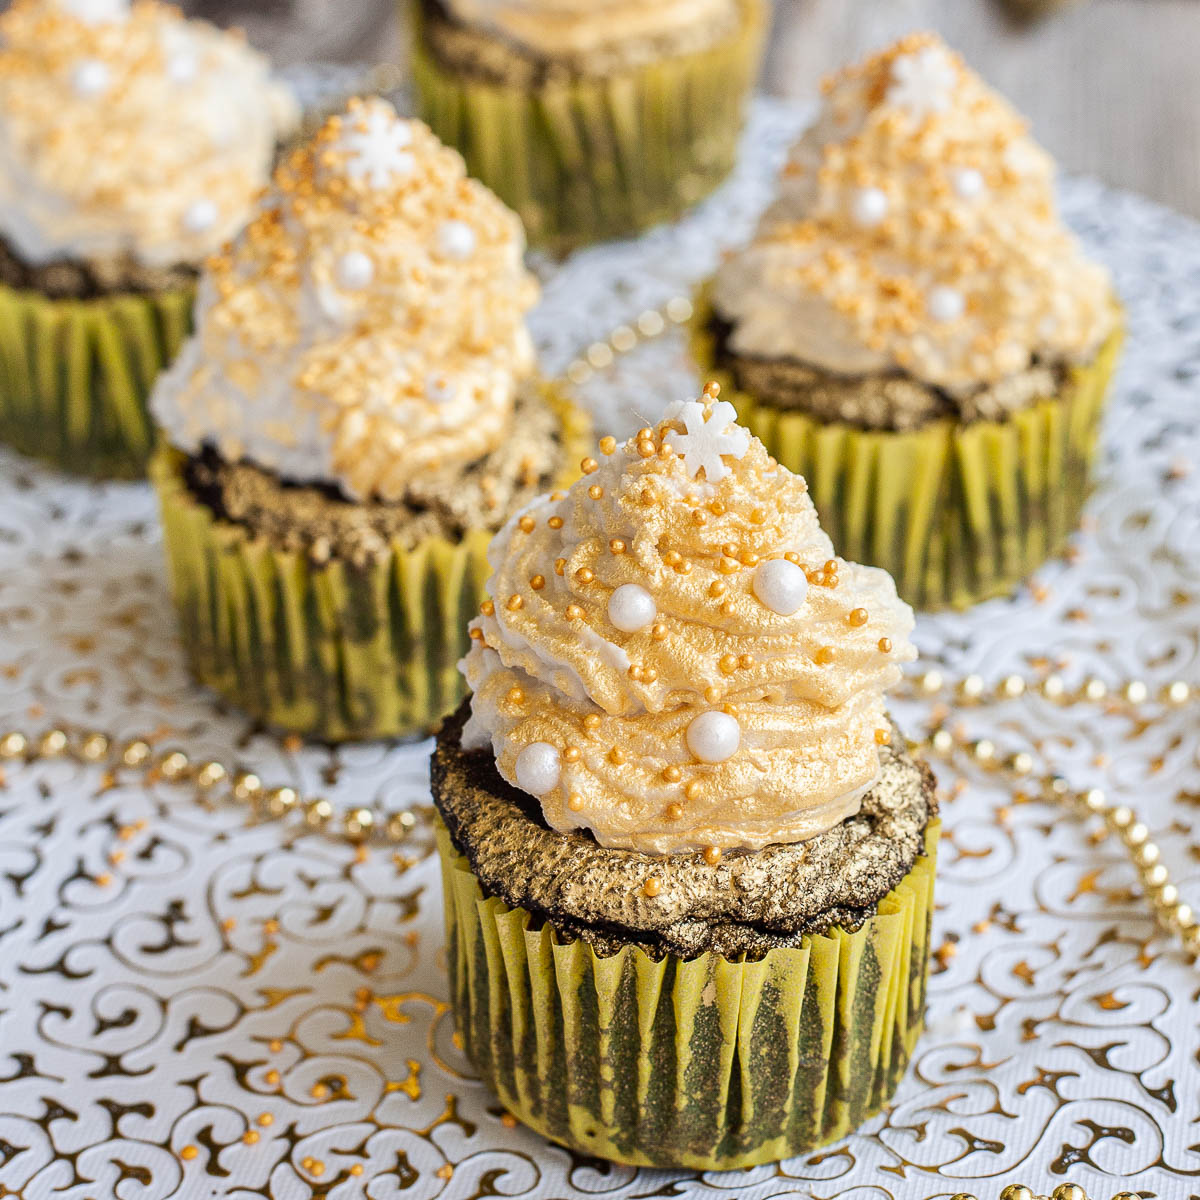 <p>Replacing one egg with 1/4 cup of applesauce in sweet desserts can add moisture and create a rich, moist texture without changing the taste. An additional 1/2 teaspoon of baking powder can be added to the recipe to achieve a lighter texture. This egg replacement technique works well in desserts like these vegan brownie cupcakes.</p><p>Get the recipe from My Pure Plants: <a href="https://mypureplants.com/vegan-gluten-free-brownies/">vegan brownie cupcakes</a></p>